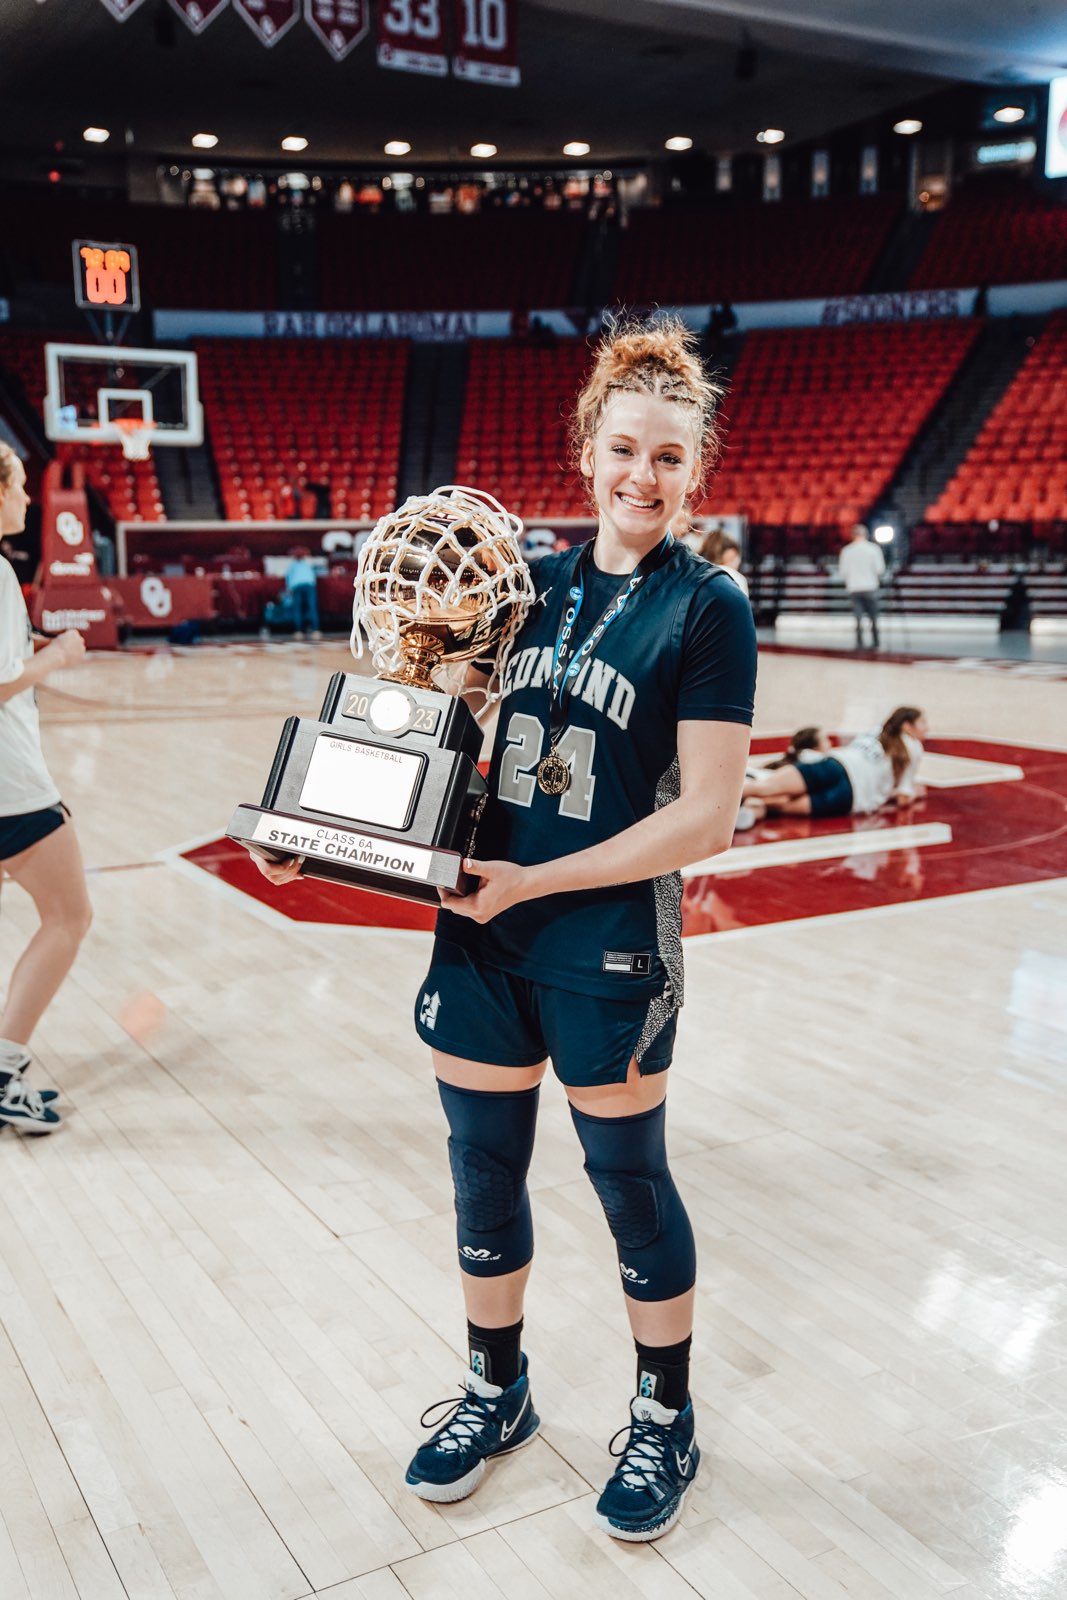 Edmond North's Laci Steele hoists the 6A state championship trophy after the Lady Huskies repeated as 6A champions in March.